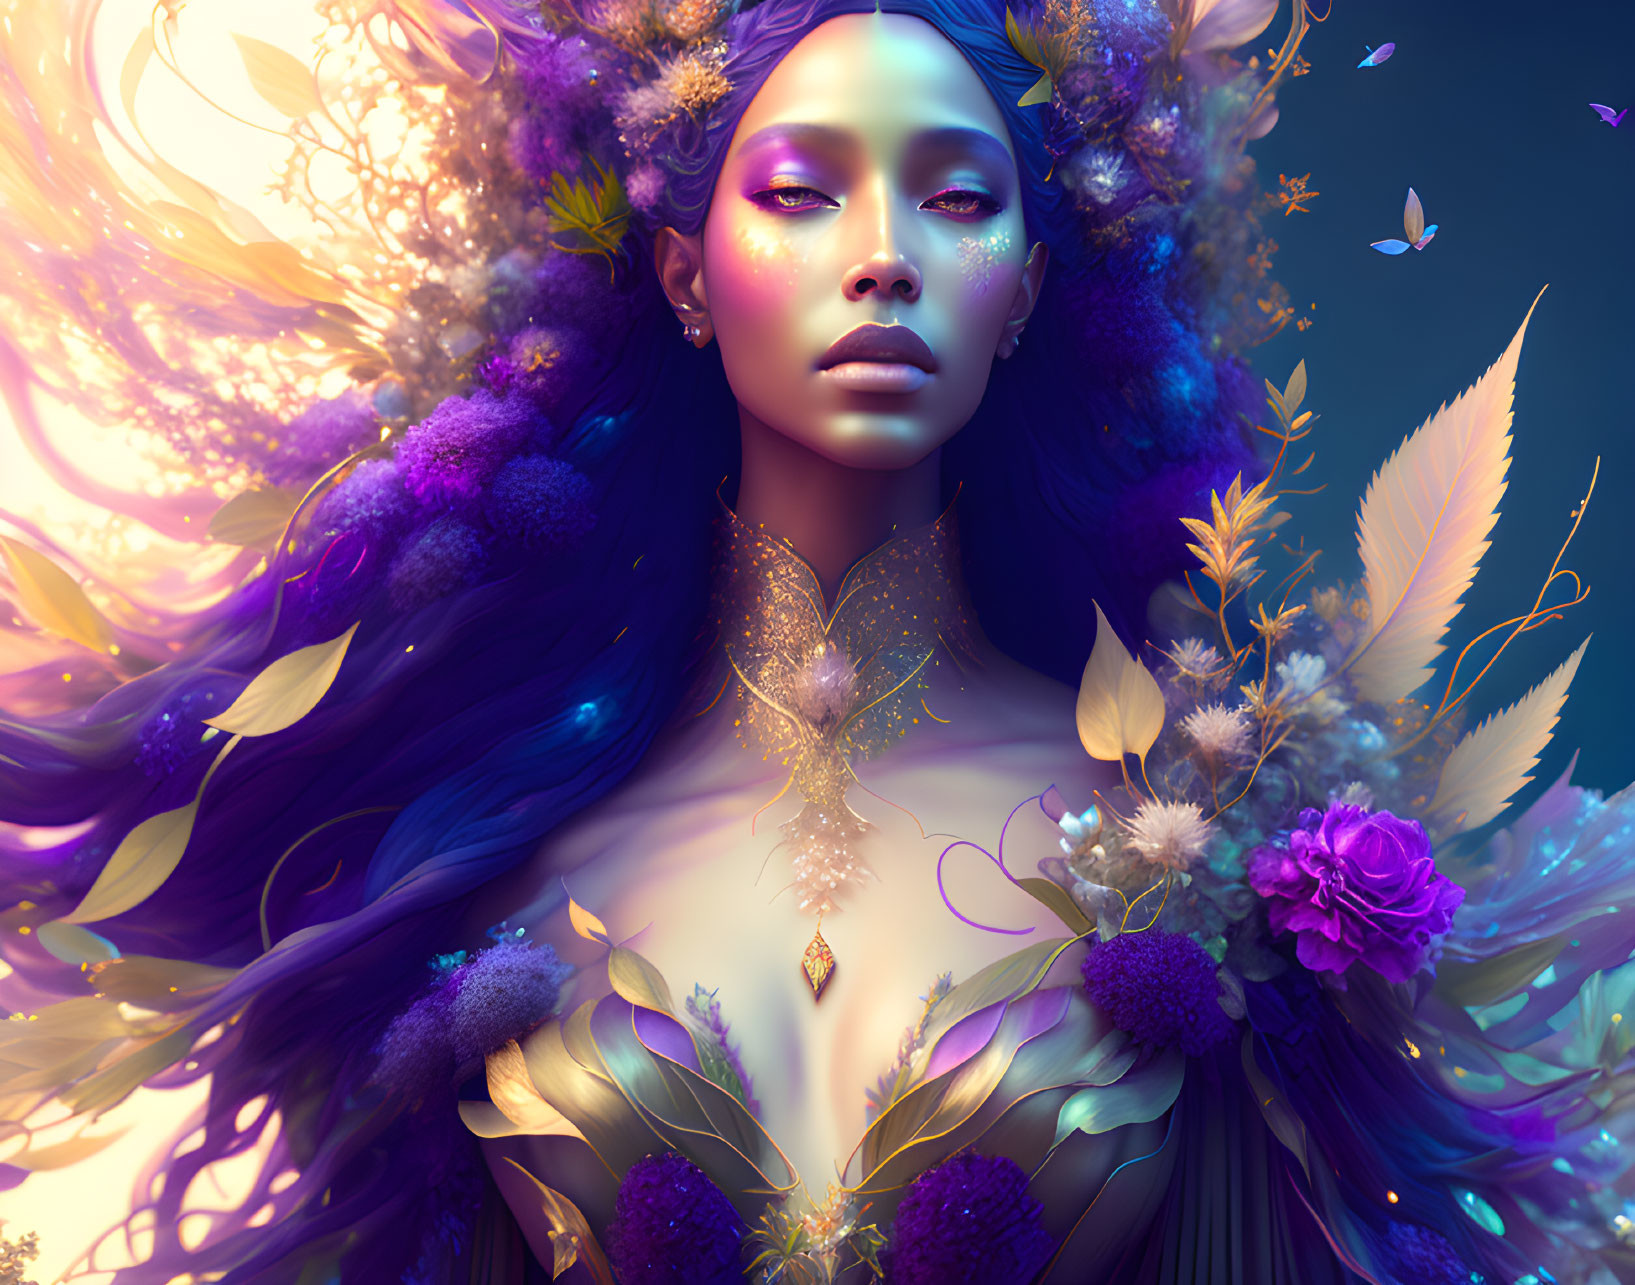 Portrait of a Woman with Violet Skin and Colorful Nature Scene